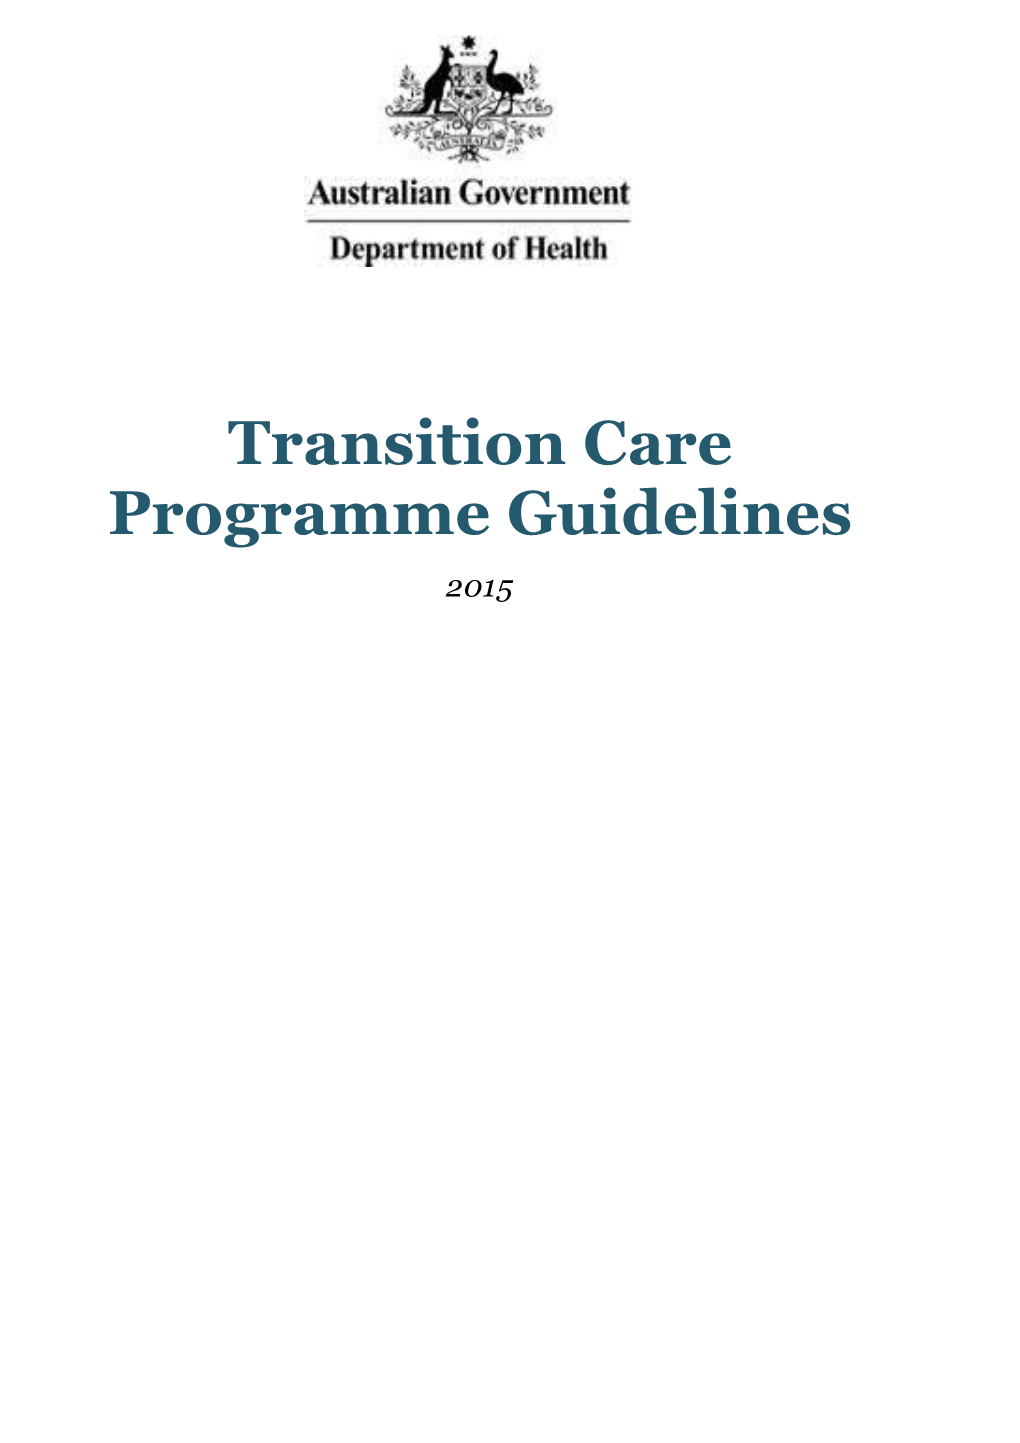 Transition Care Programme Guidelines